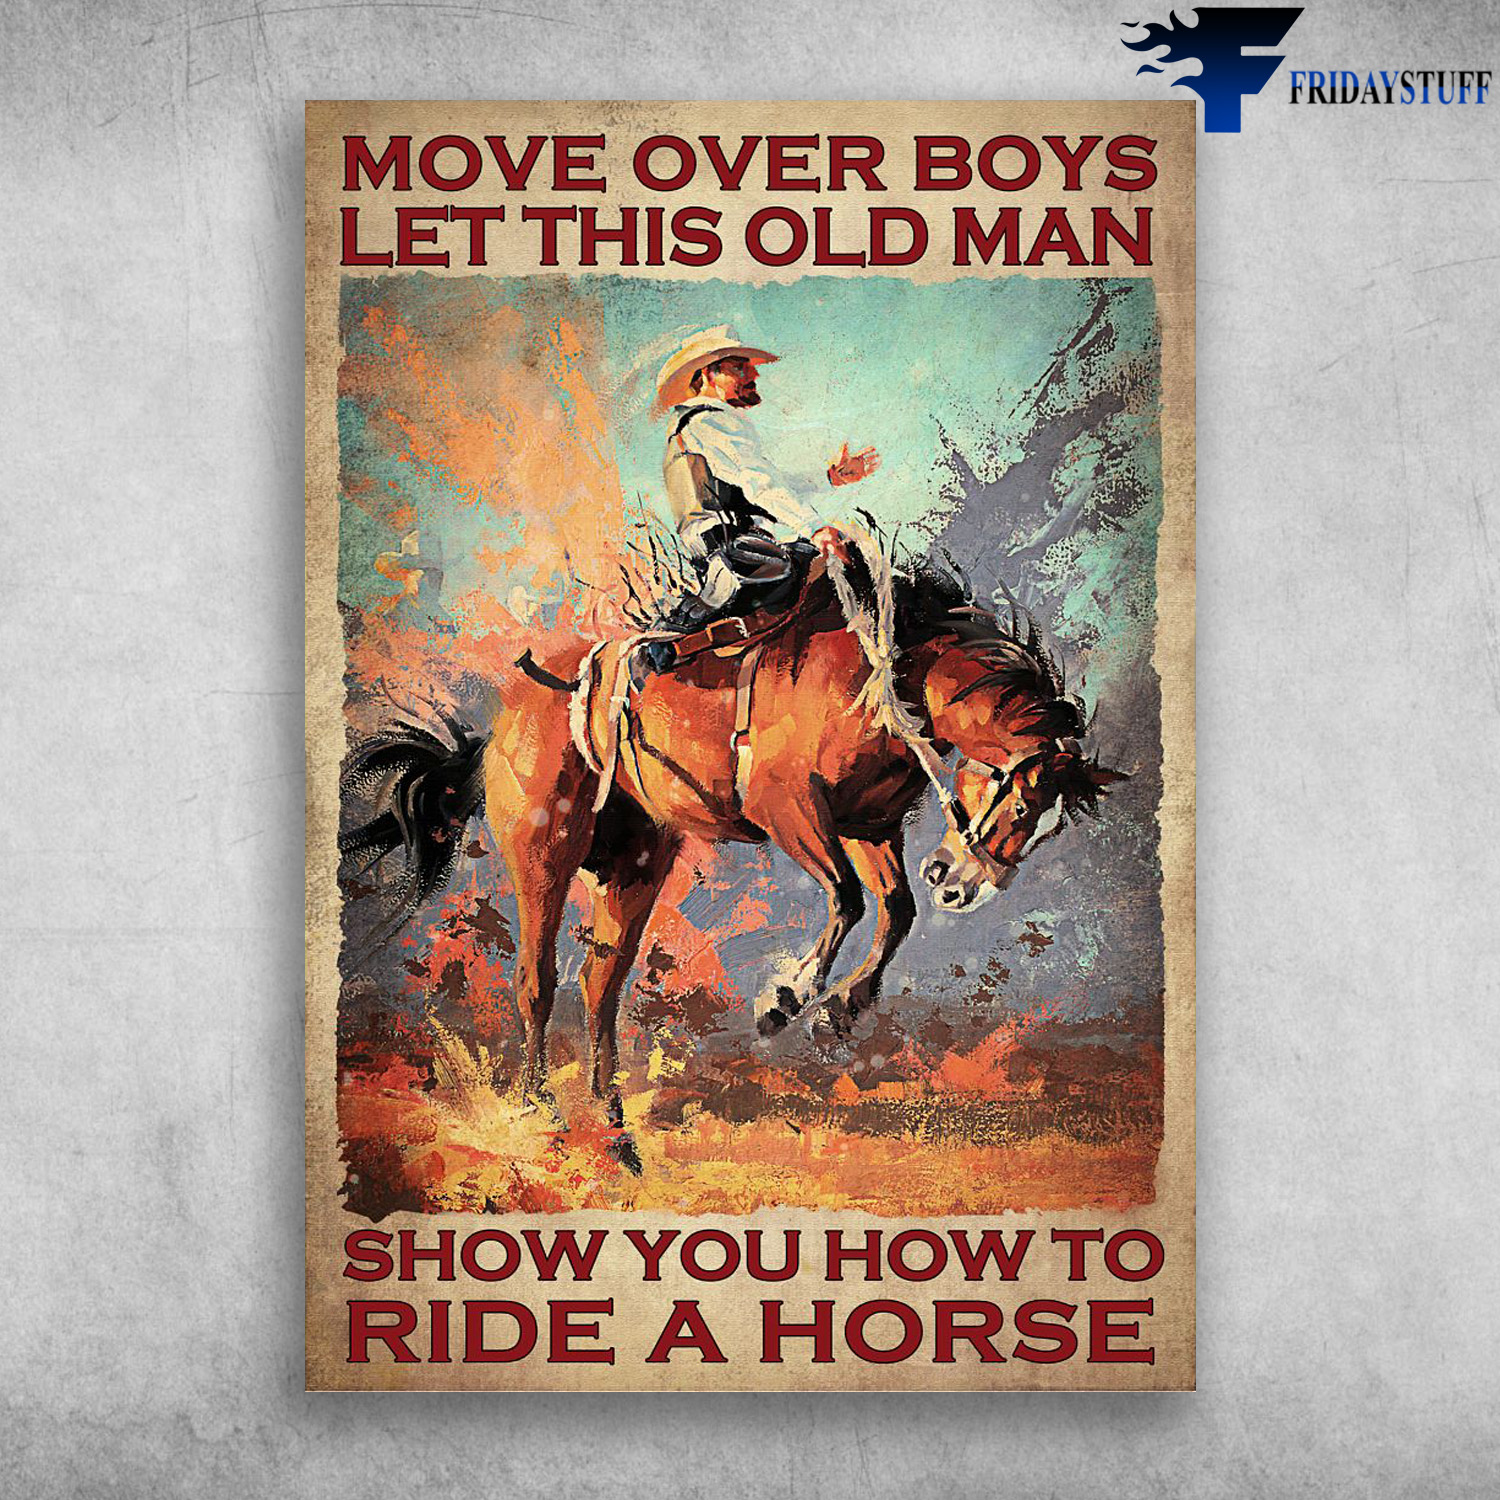 Man Riding Horse - Move Over Boys, Let This Old Man, Show You How To Ride A Horse